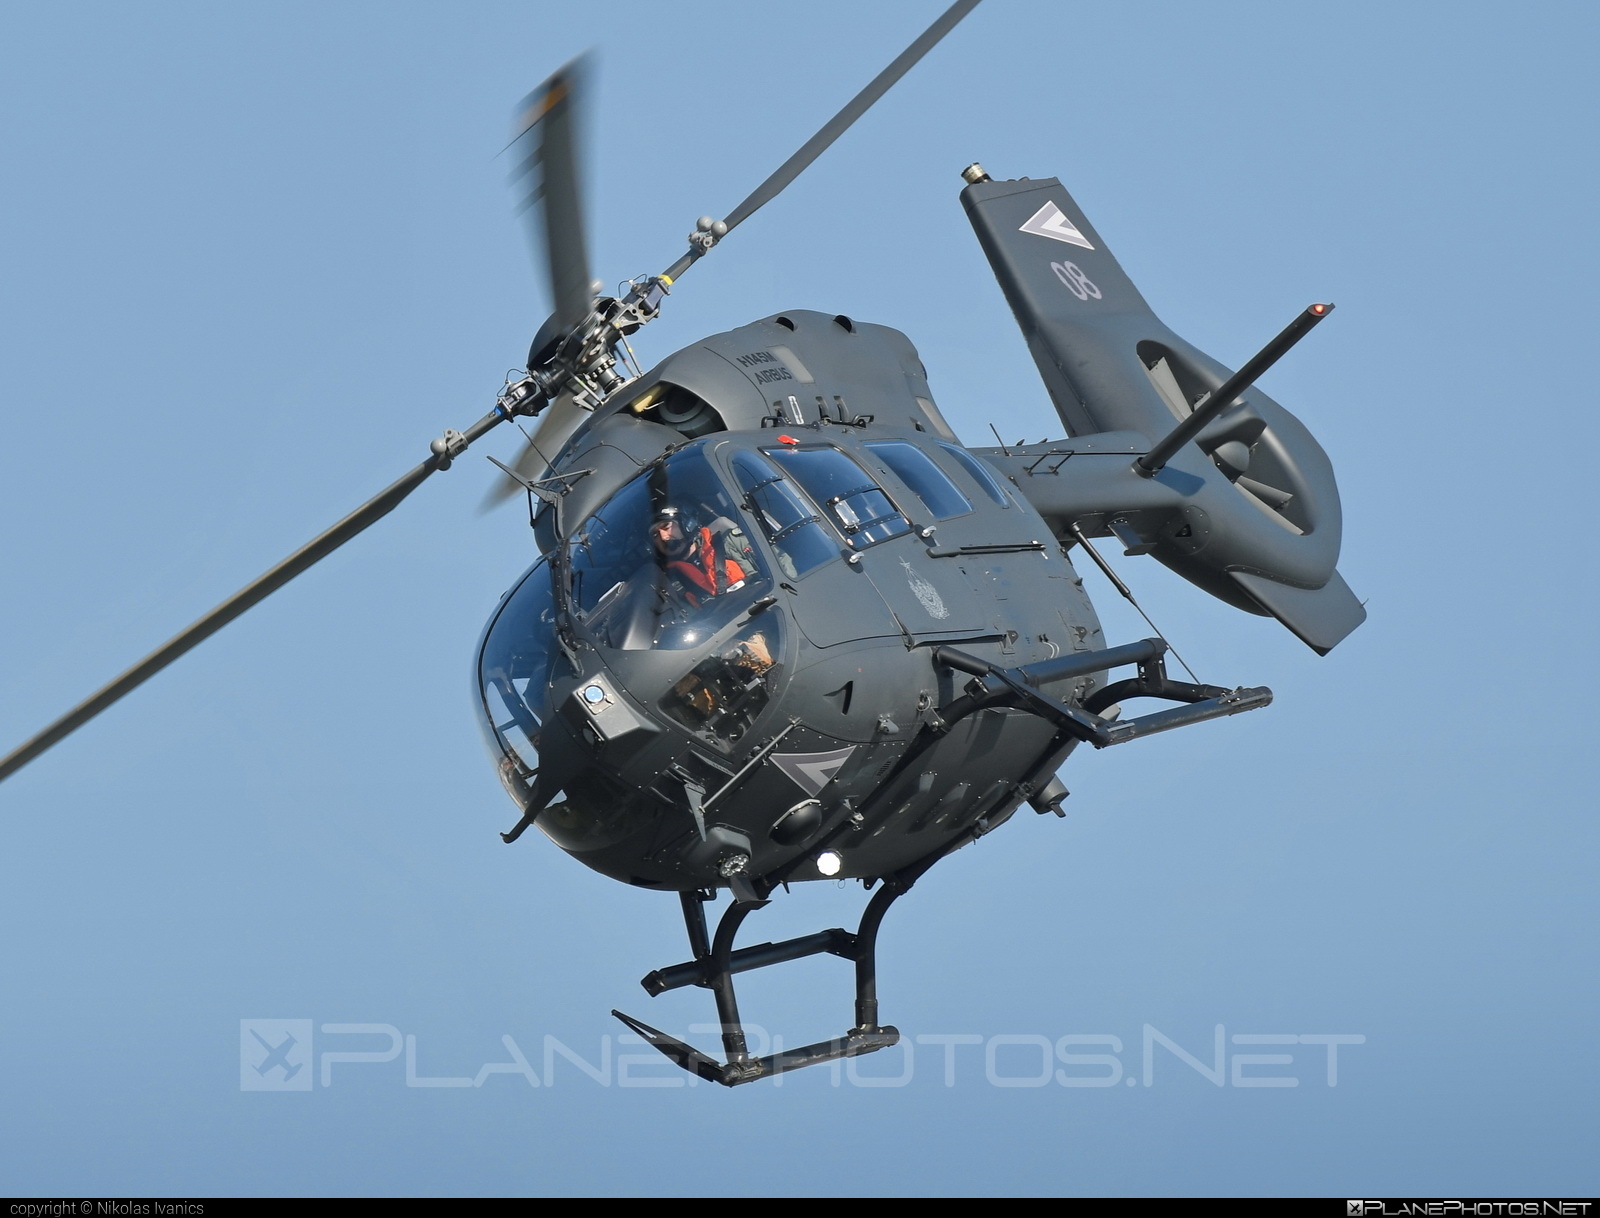 Airbus Helicopters H145M - 08 operated by Magyar Légierő (Hungarian Air Force) #airbusH145 #airbusH145m #airbusHelicoptersH145 #airbusHelicoptersH145m #airbushelicopters #h145 #h145m #hungarianairforce #magyarlegiero